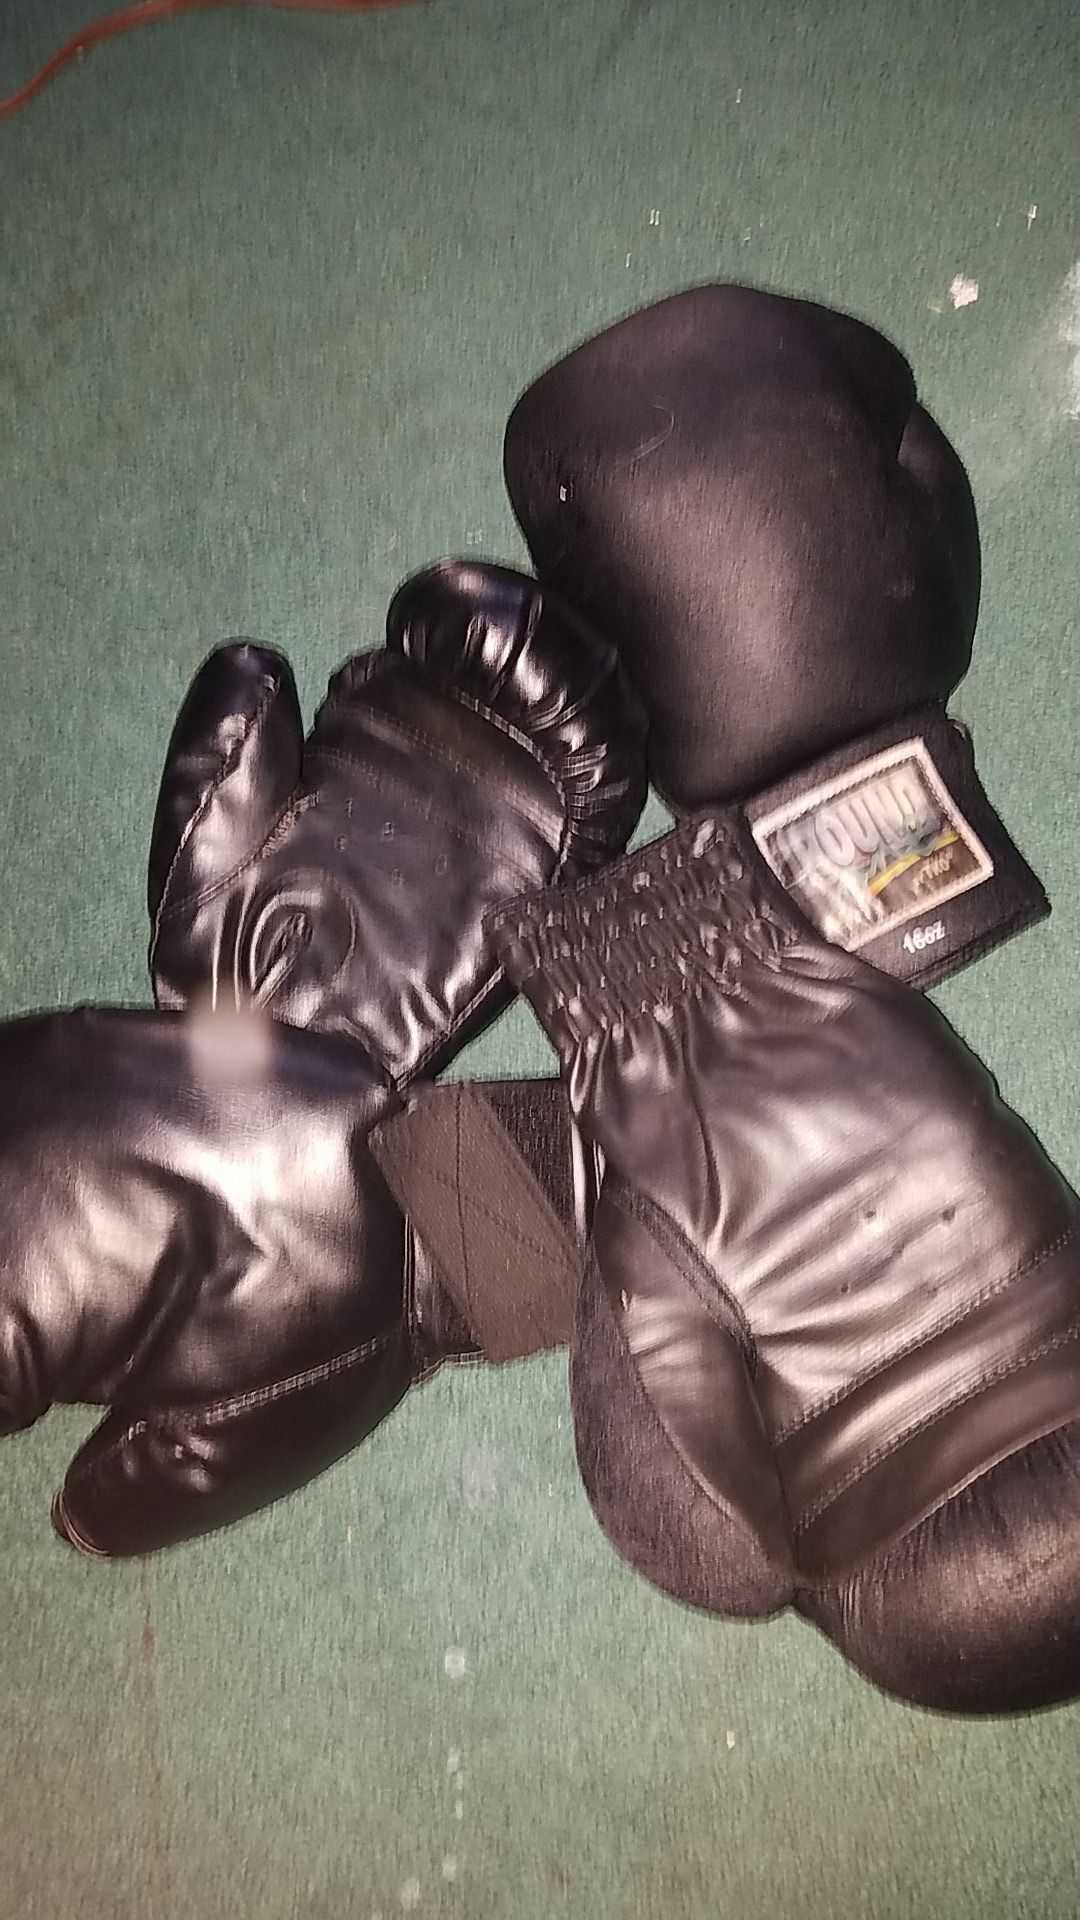 2 pairs of boxing gloves